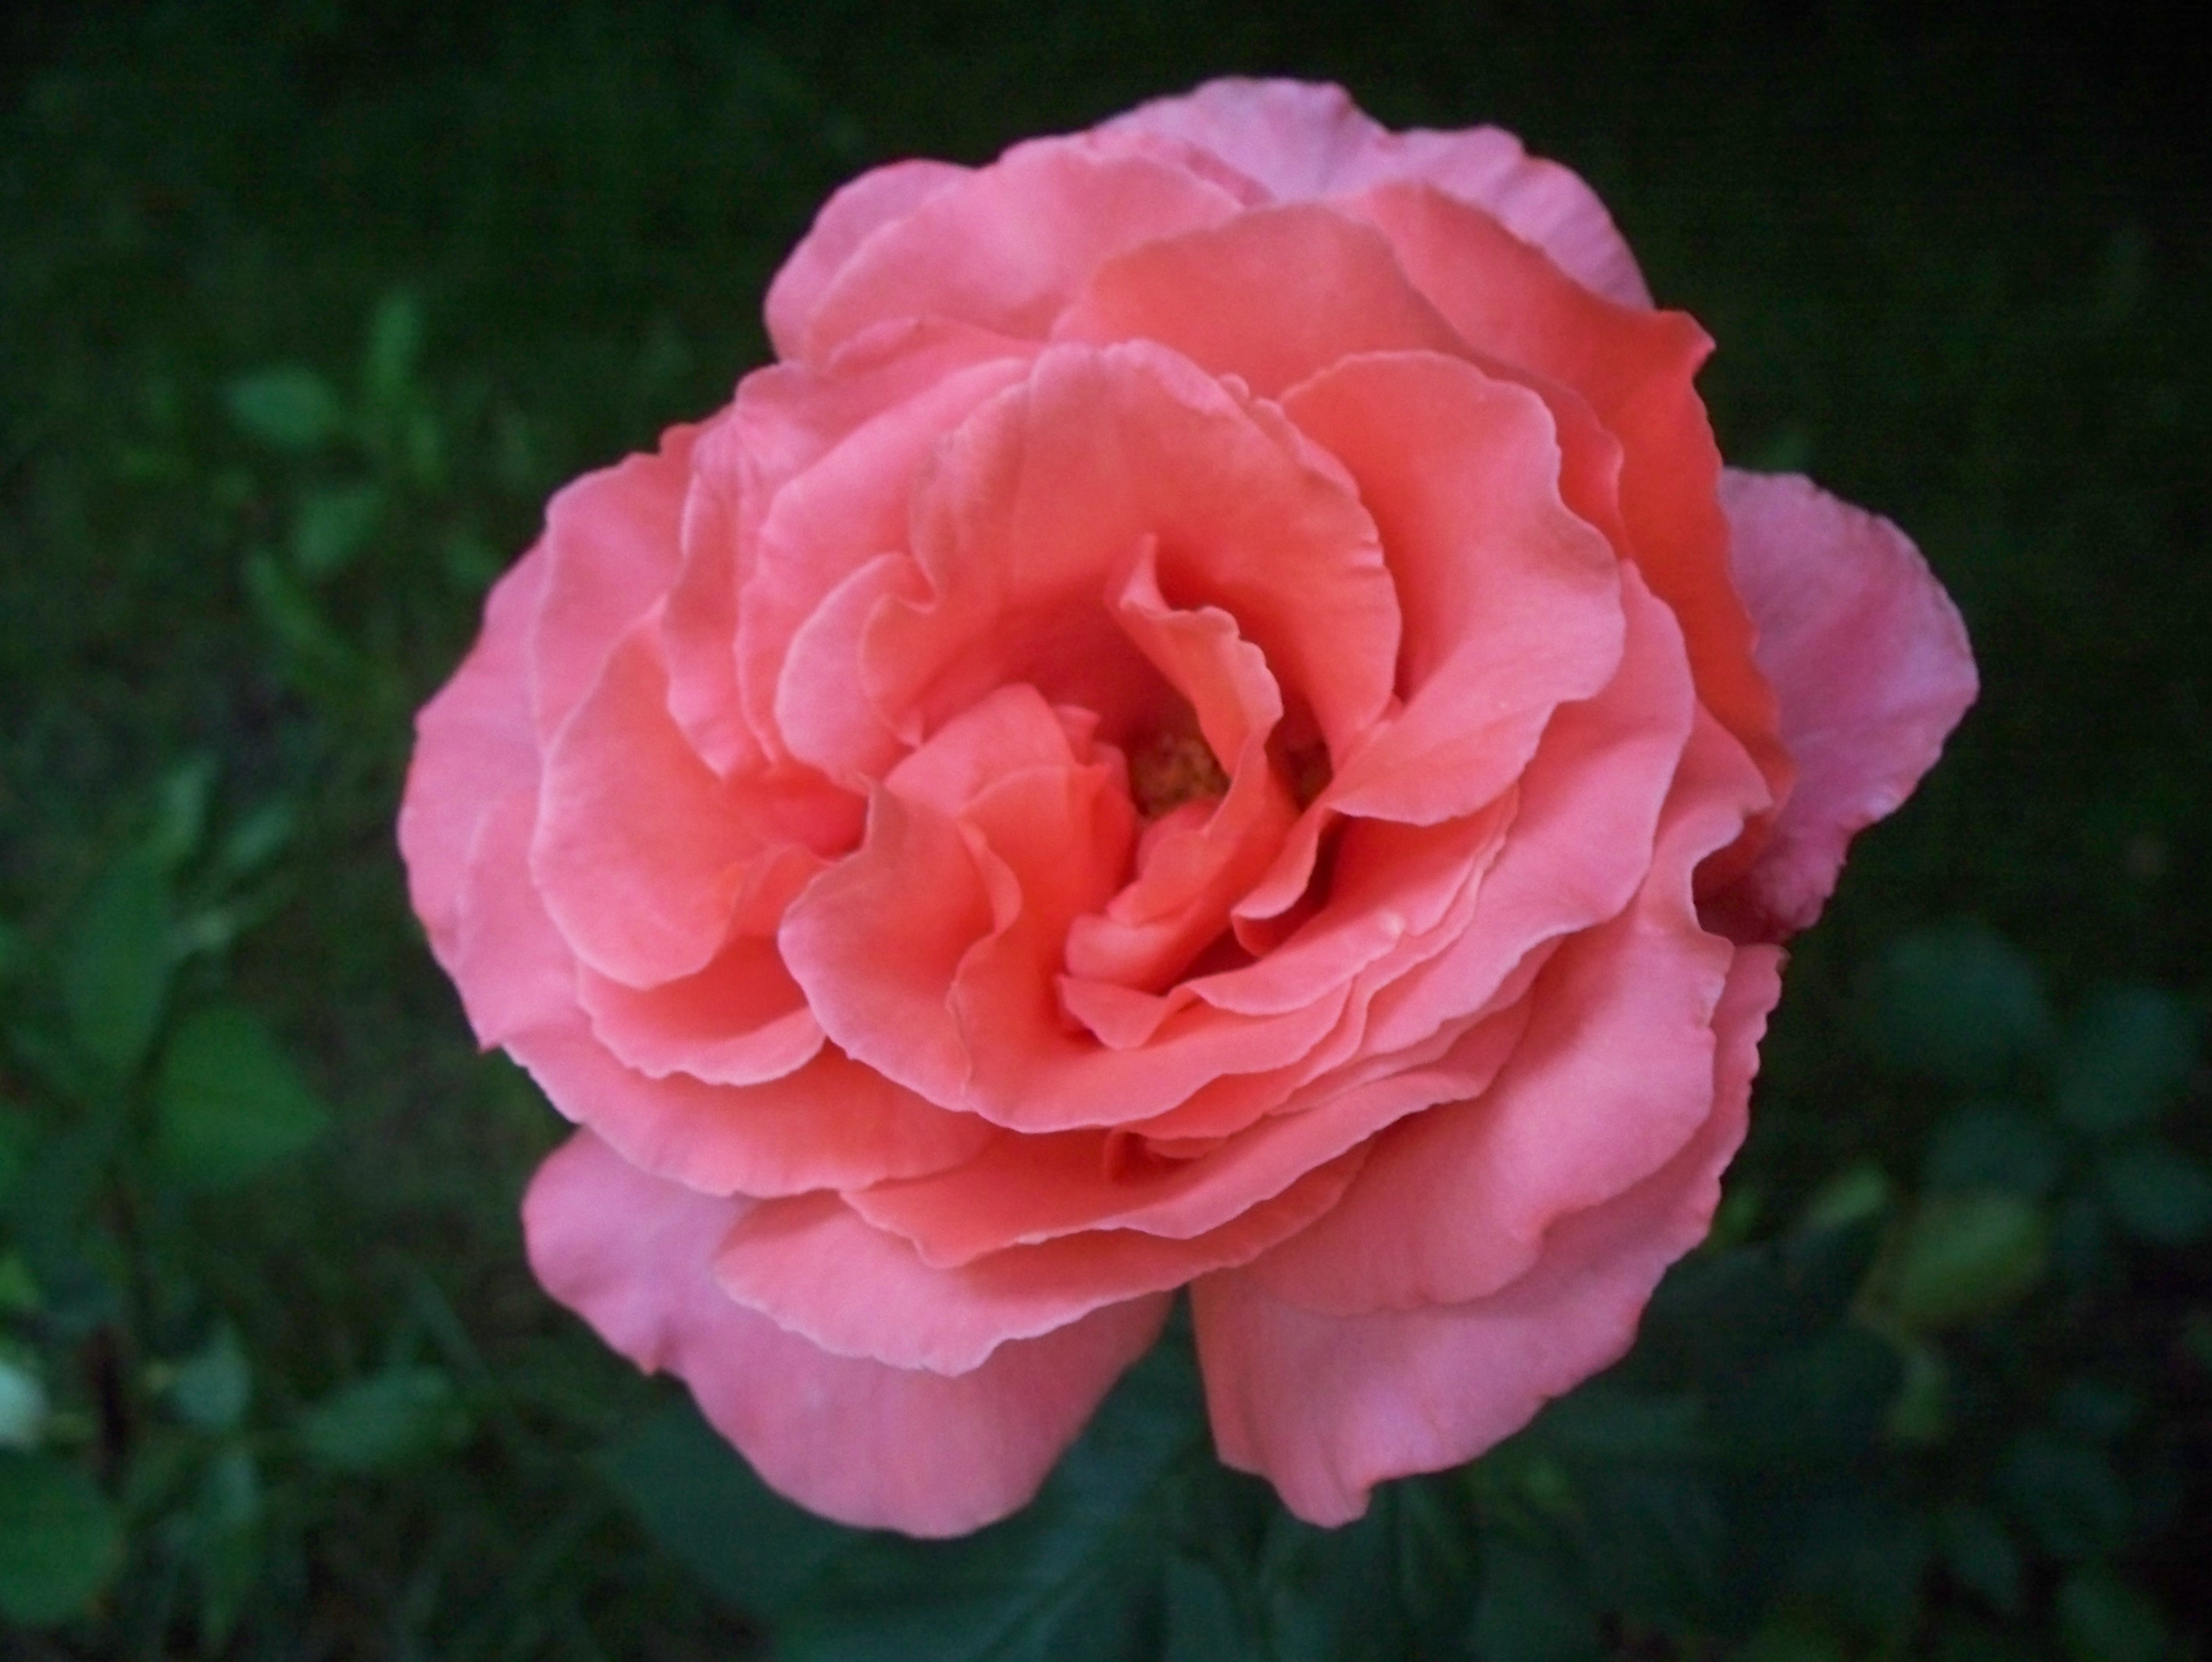 File:Closeup of a pink rose in full bloom..JPG - Wikimedia Commons